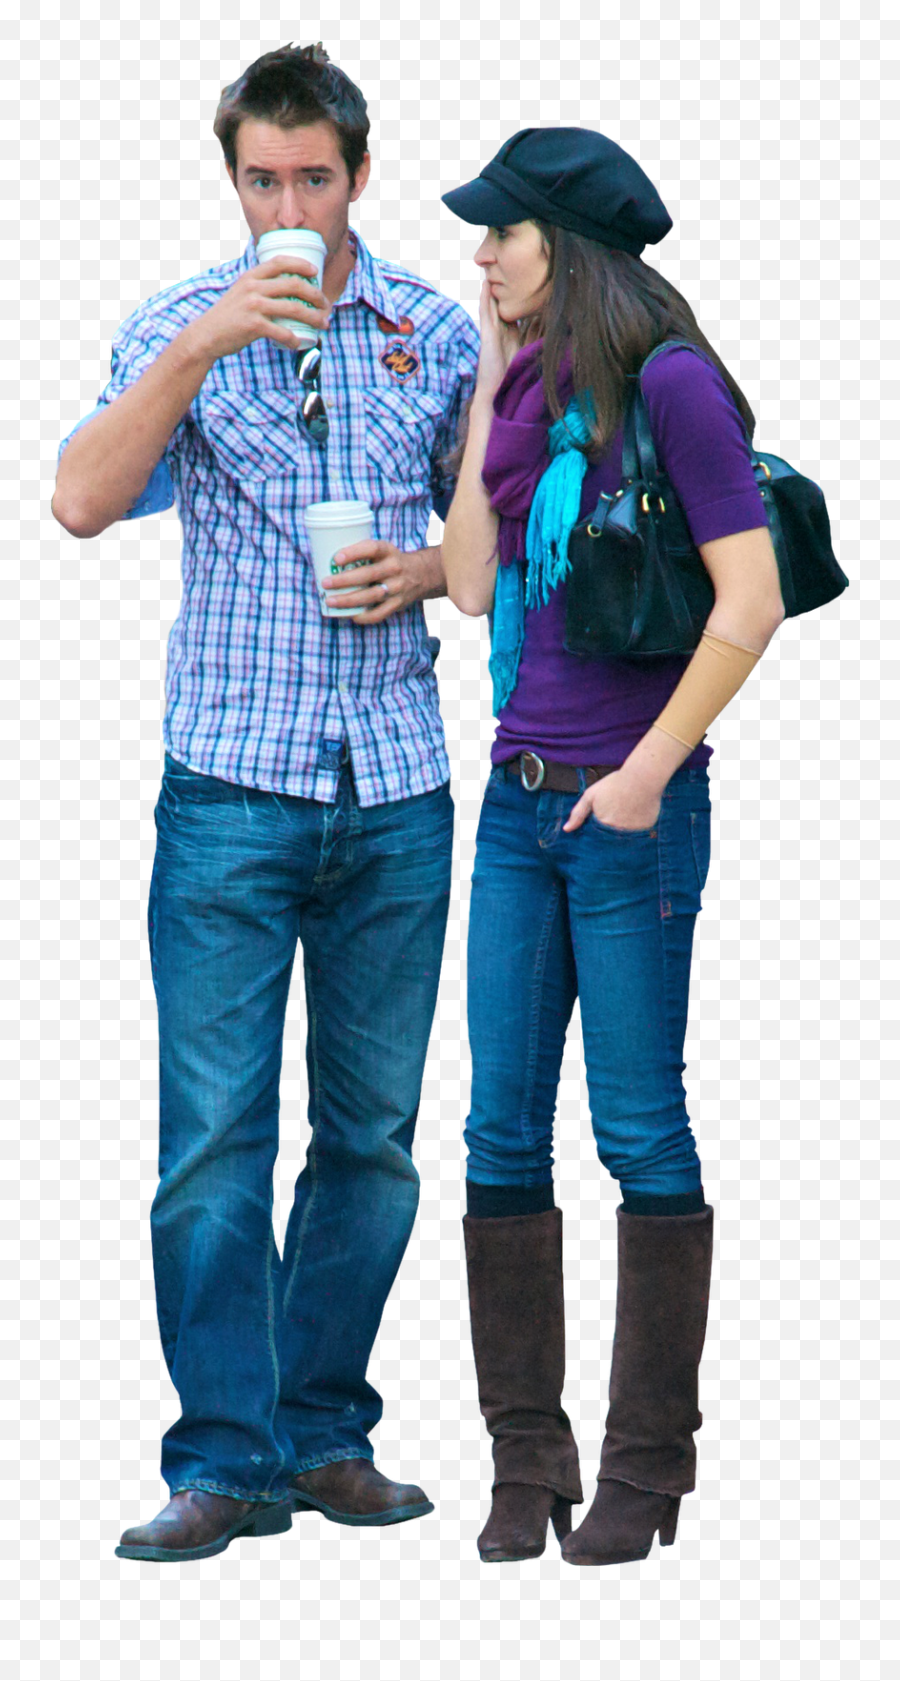 Download Hd Standing Charlie Bruzzese - People Drinking Drinking Coffee Hd Png Transparent Emoji,Drinking Png